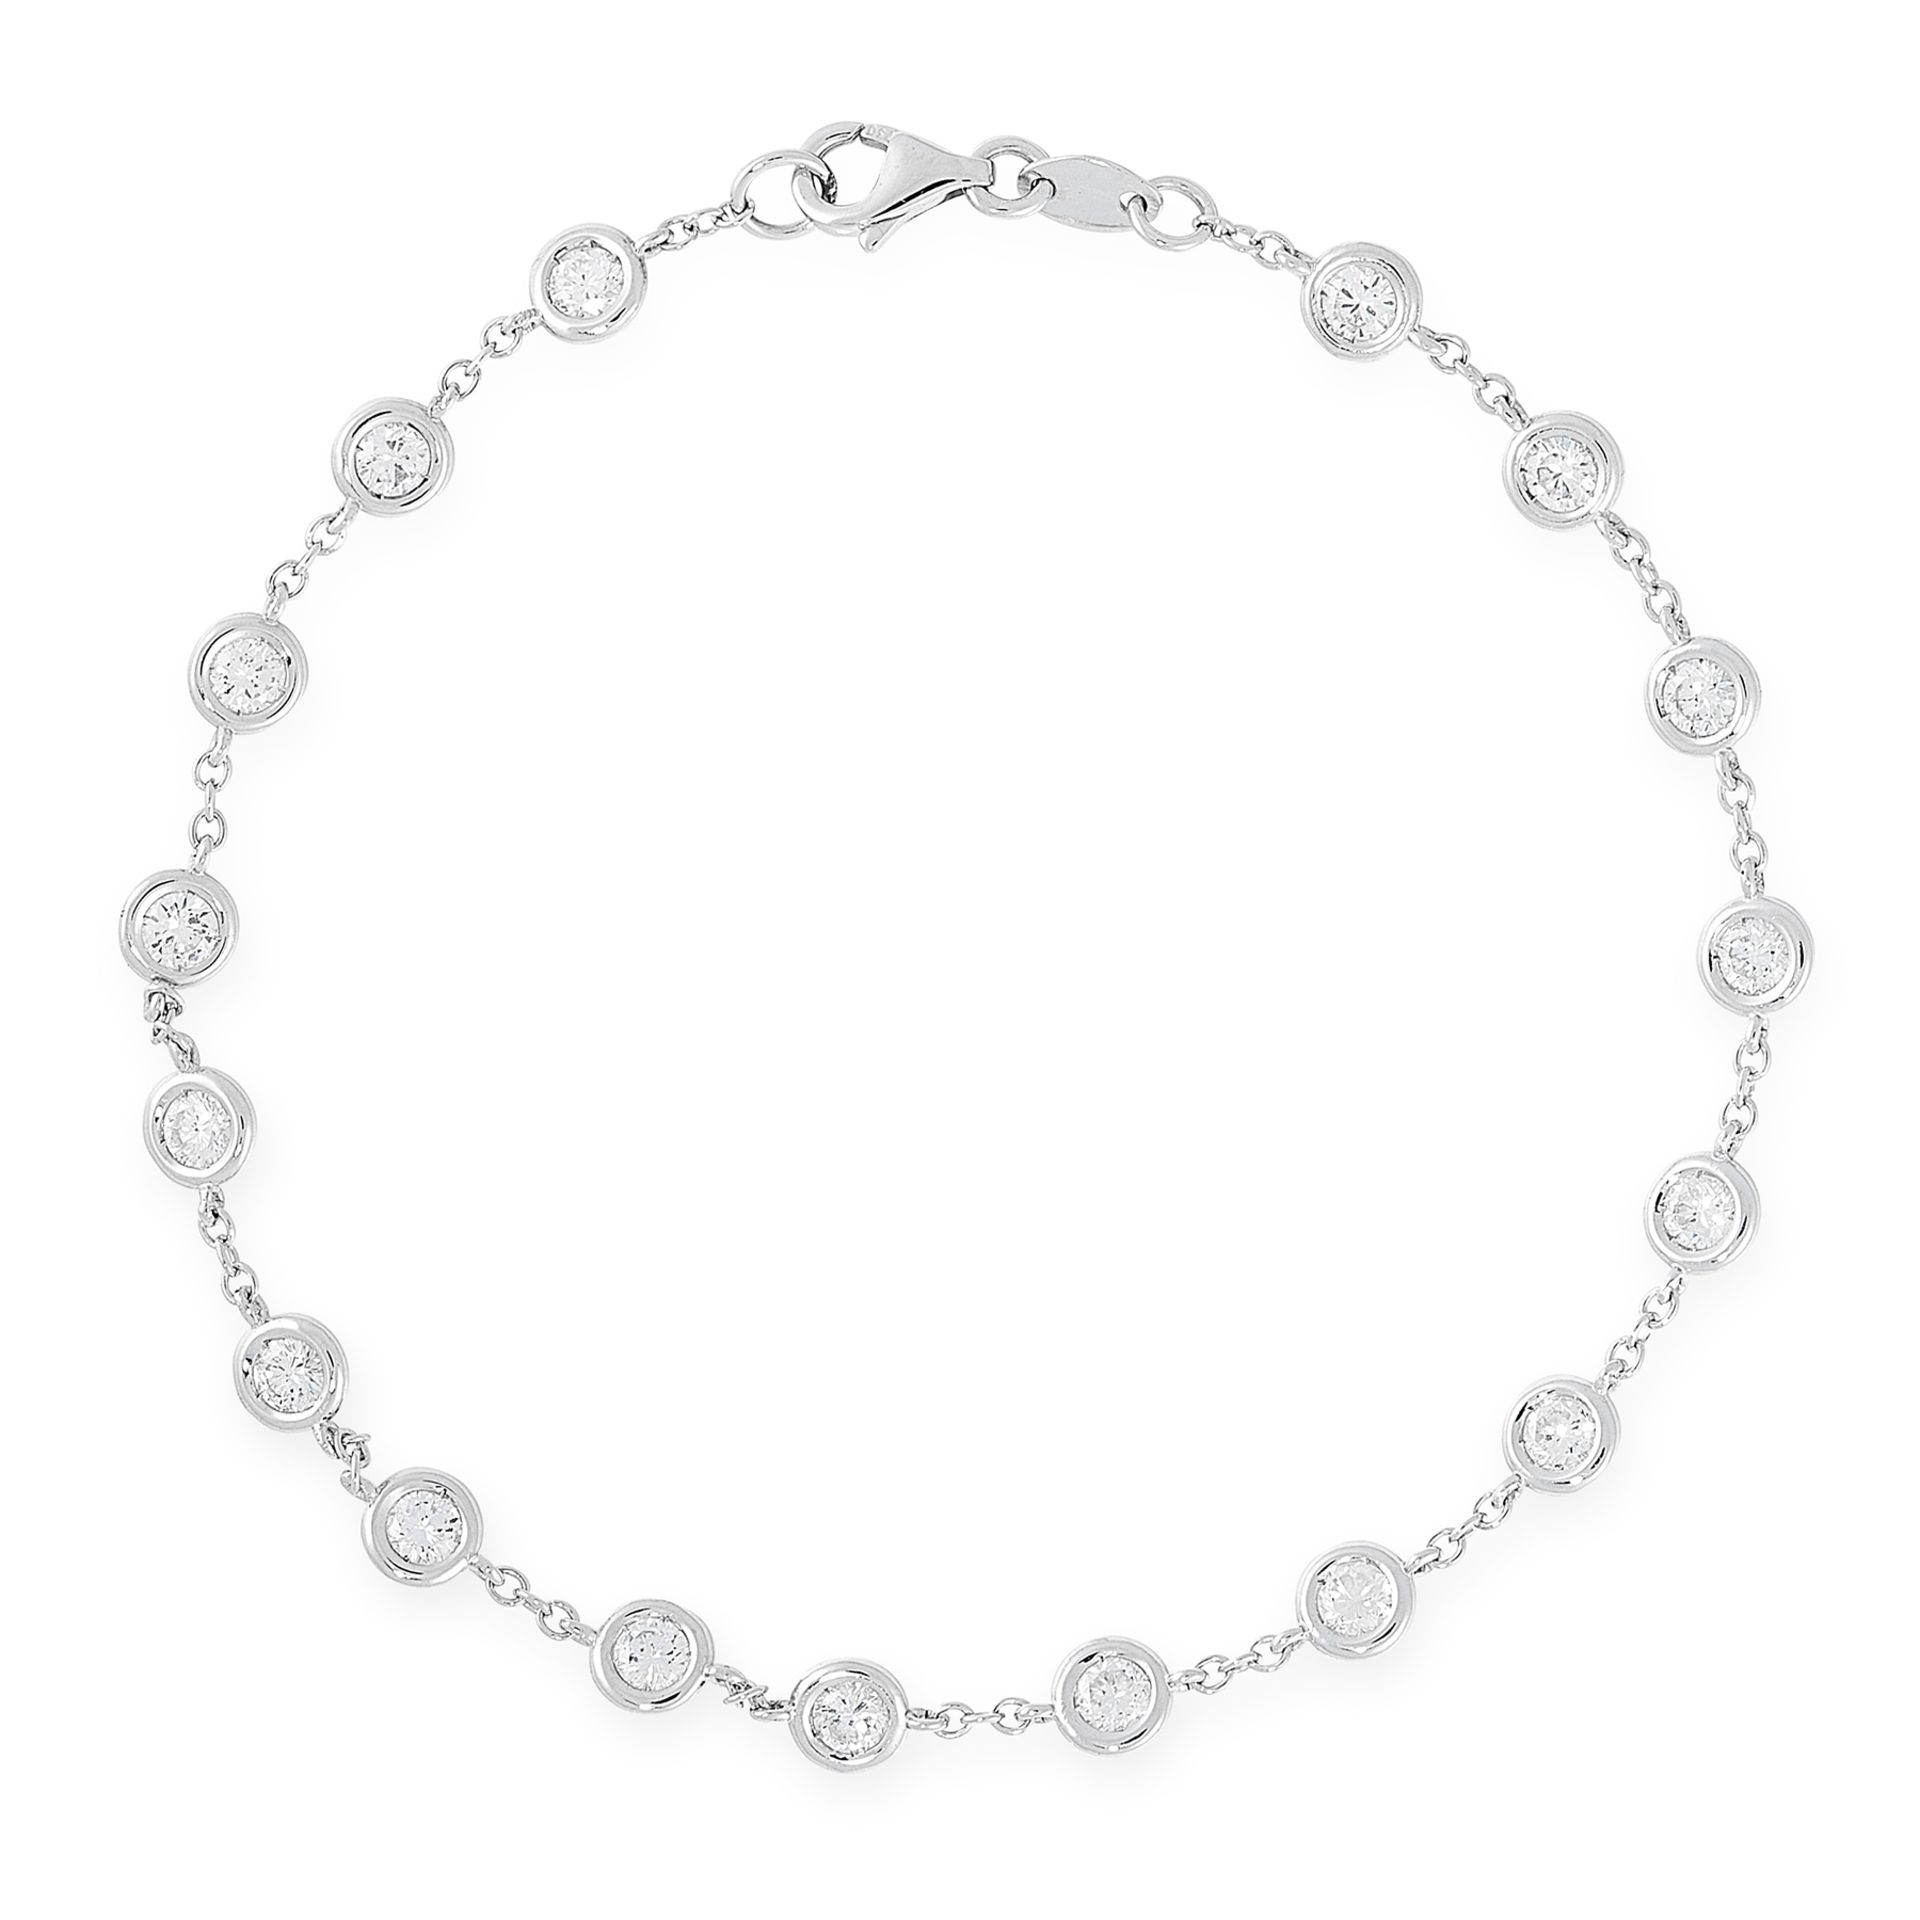 A DIAMOND BRACELET in 18ct white gold, in the manner of Tiffany & Co Diamond by the Yard, set with